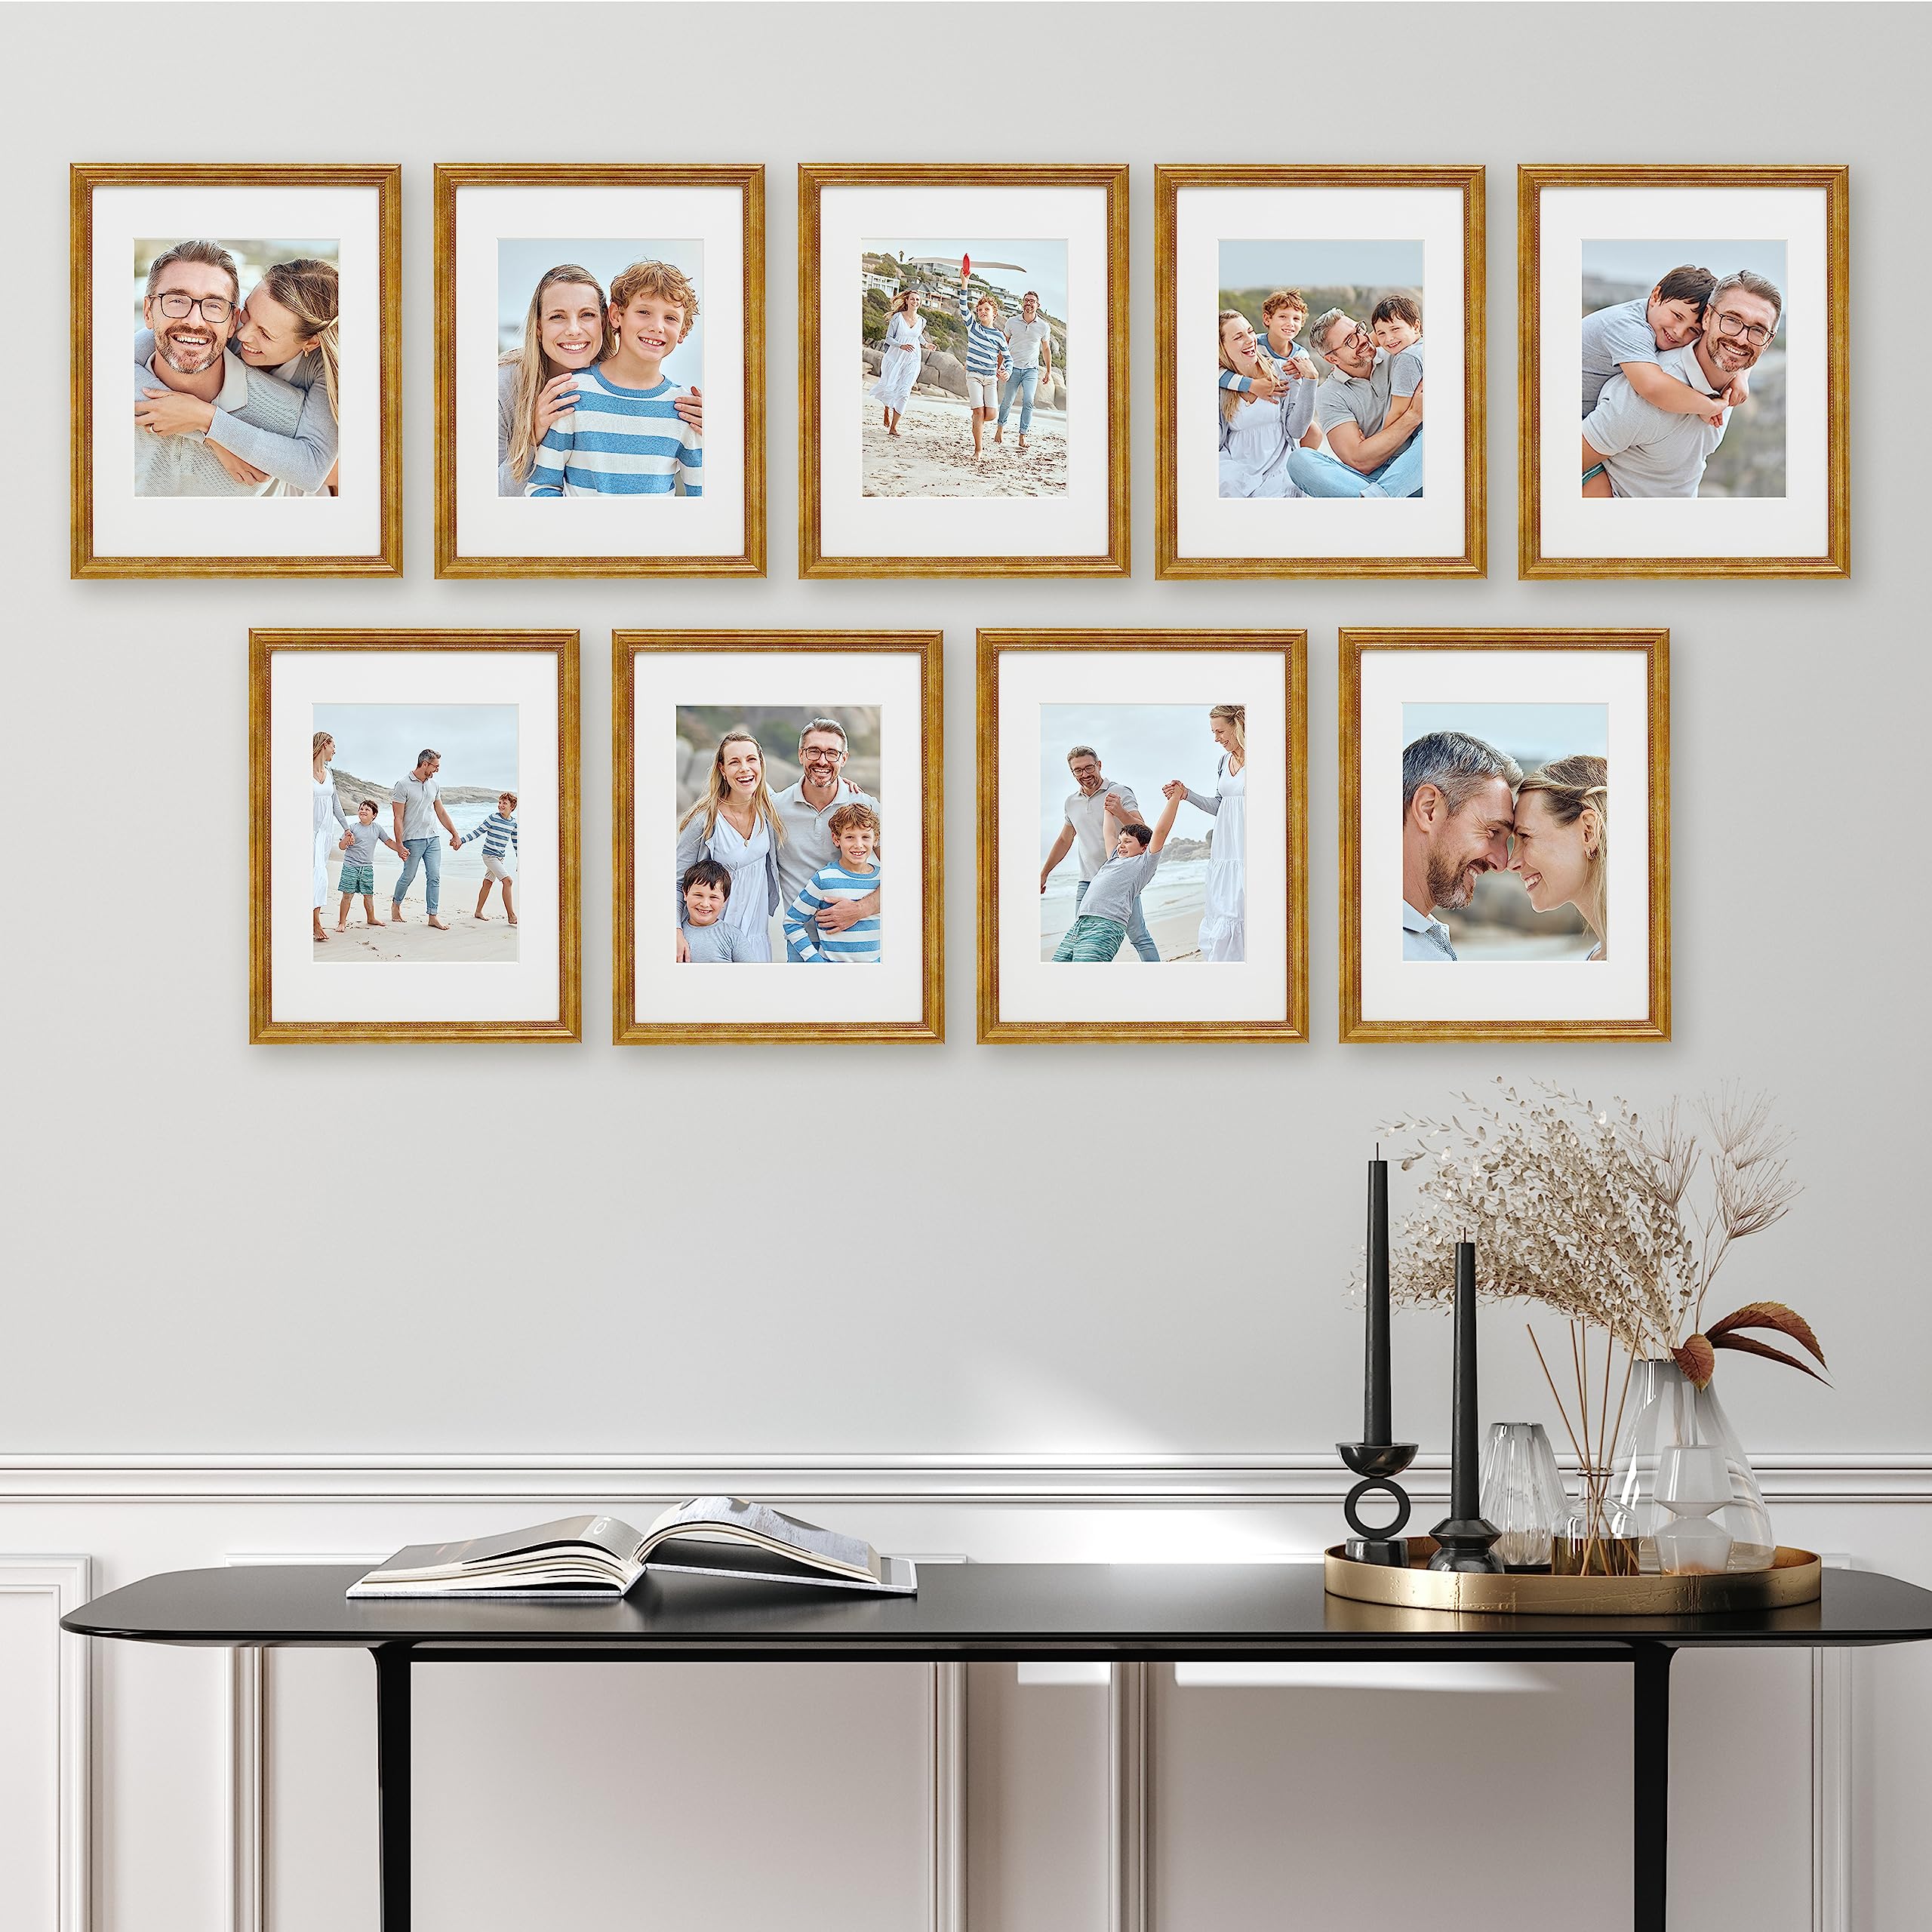 Sheffield Home 9 Piece Gallery Wall Frame Set,12x12 in, Matted to 8x8 Parent  - Like New